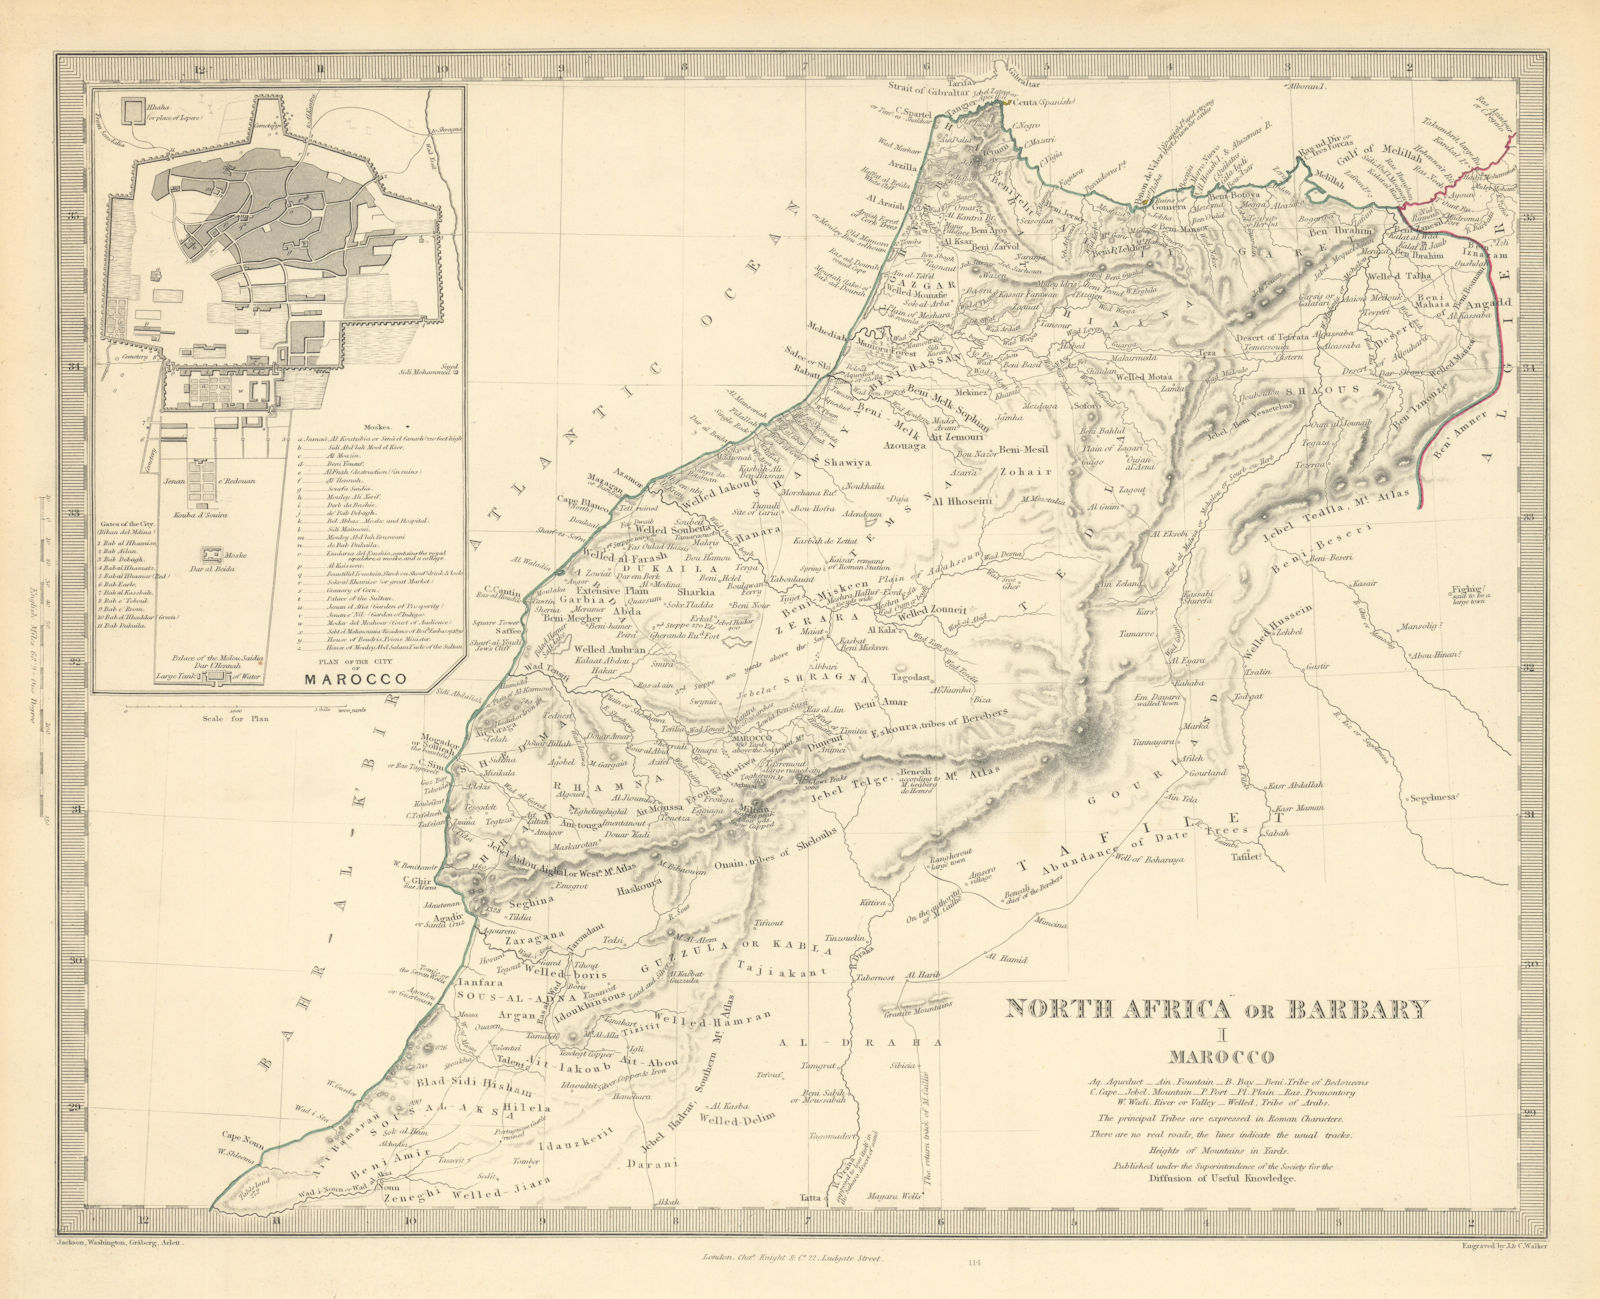 NORTH AFRICA OR BARBARY I. MAROCCO. Morocco. MARRAKECH city plan. SDUK 1851 map